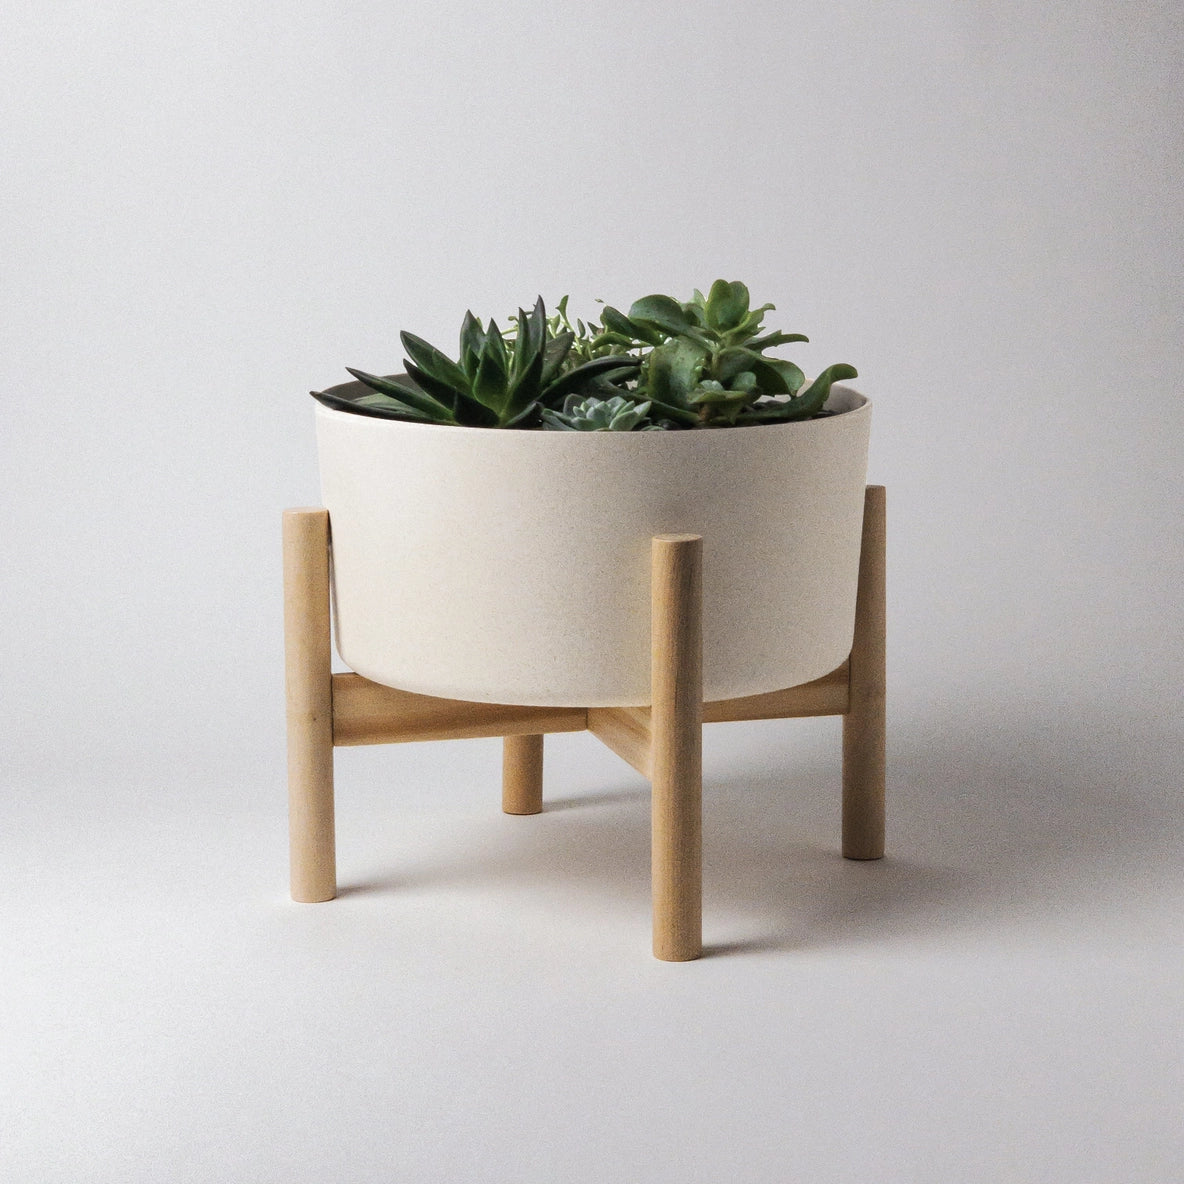 Bamboo Fibre 9" Wide Planter Pot and Stand